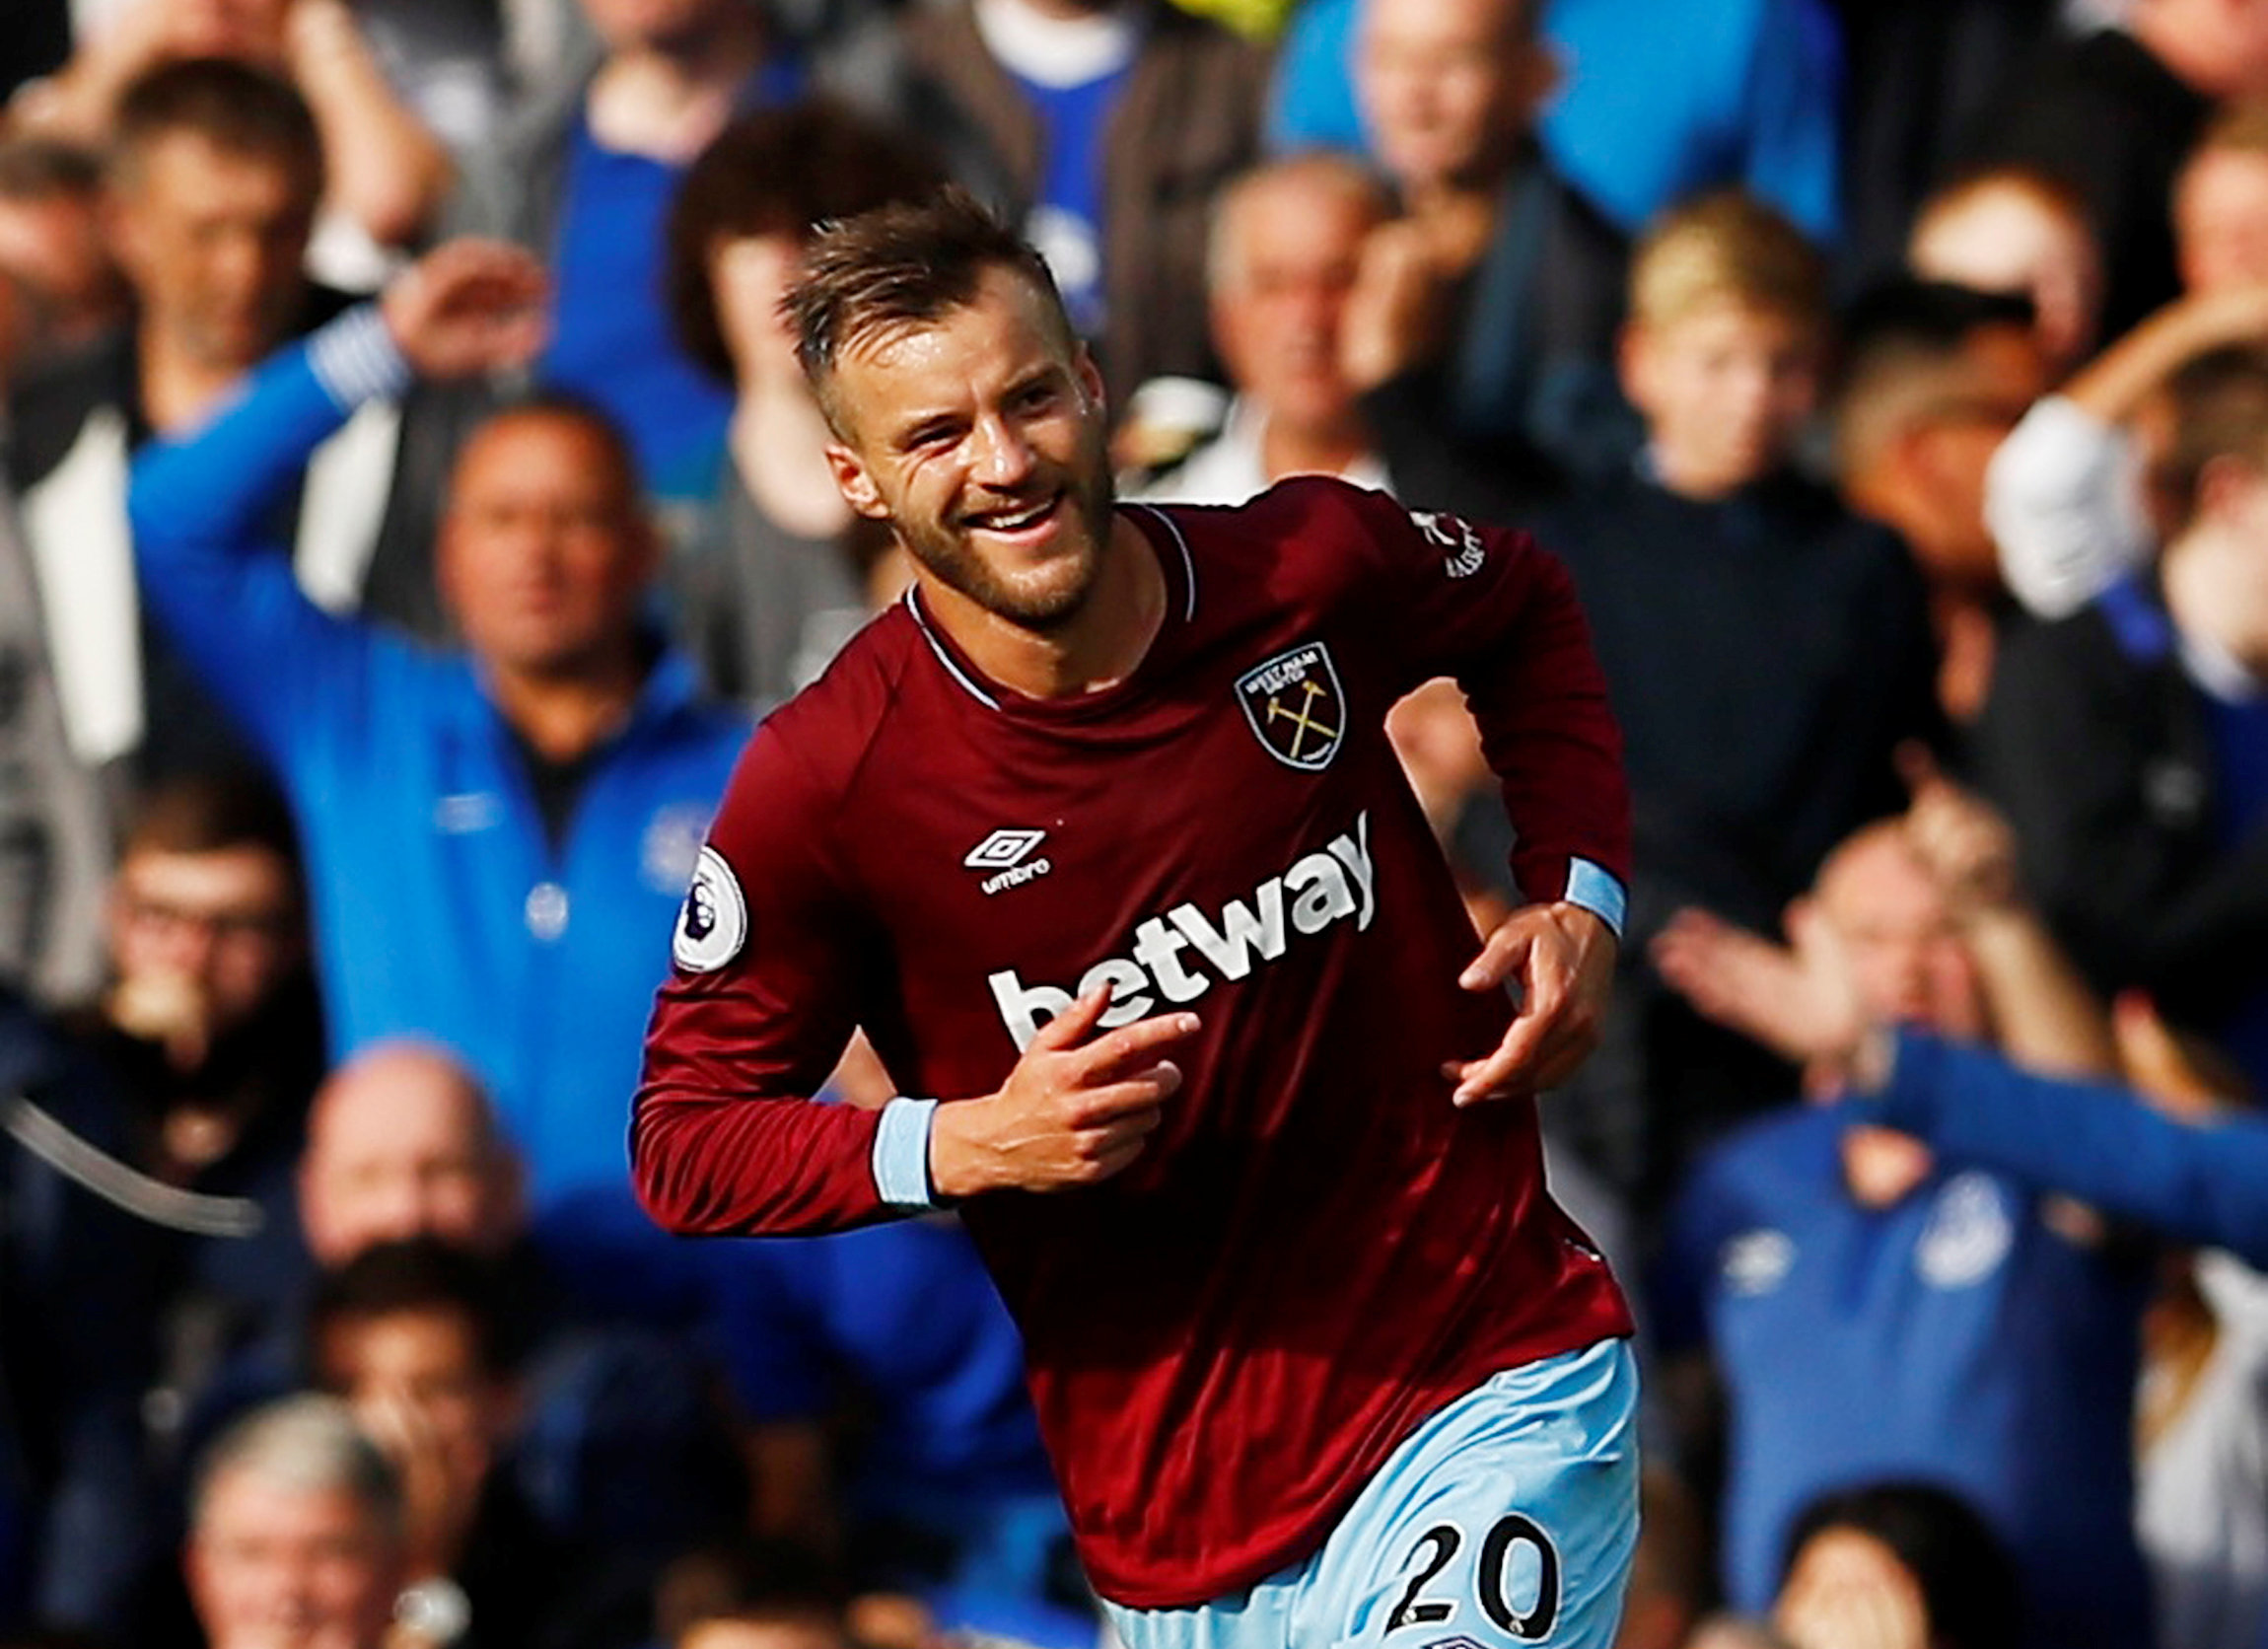 Football: West Ham beat Everton to seal first win of season